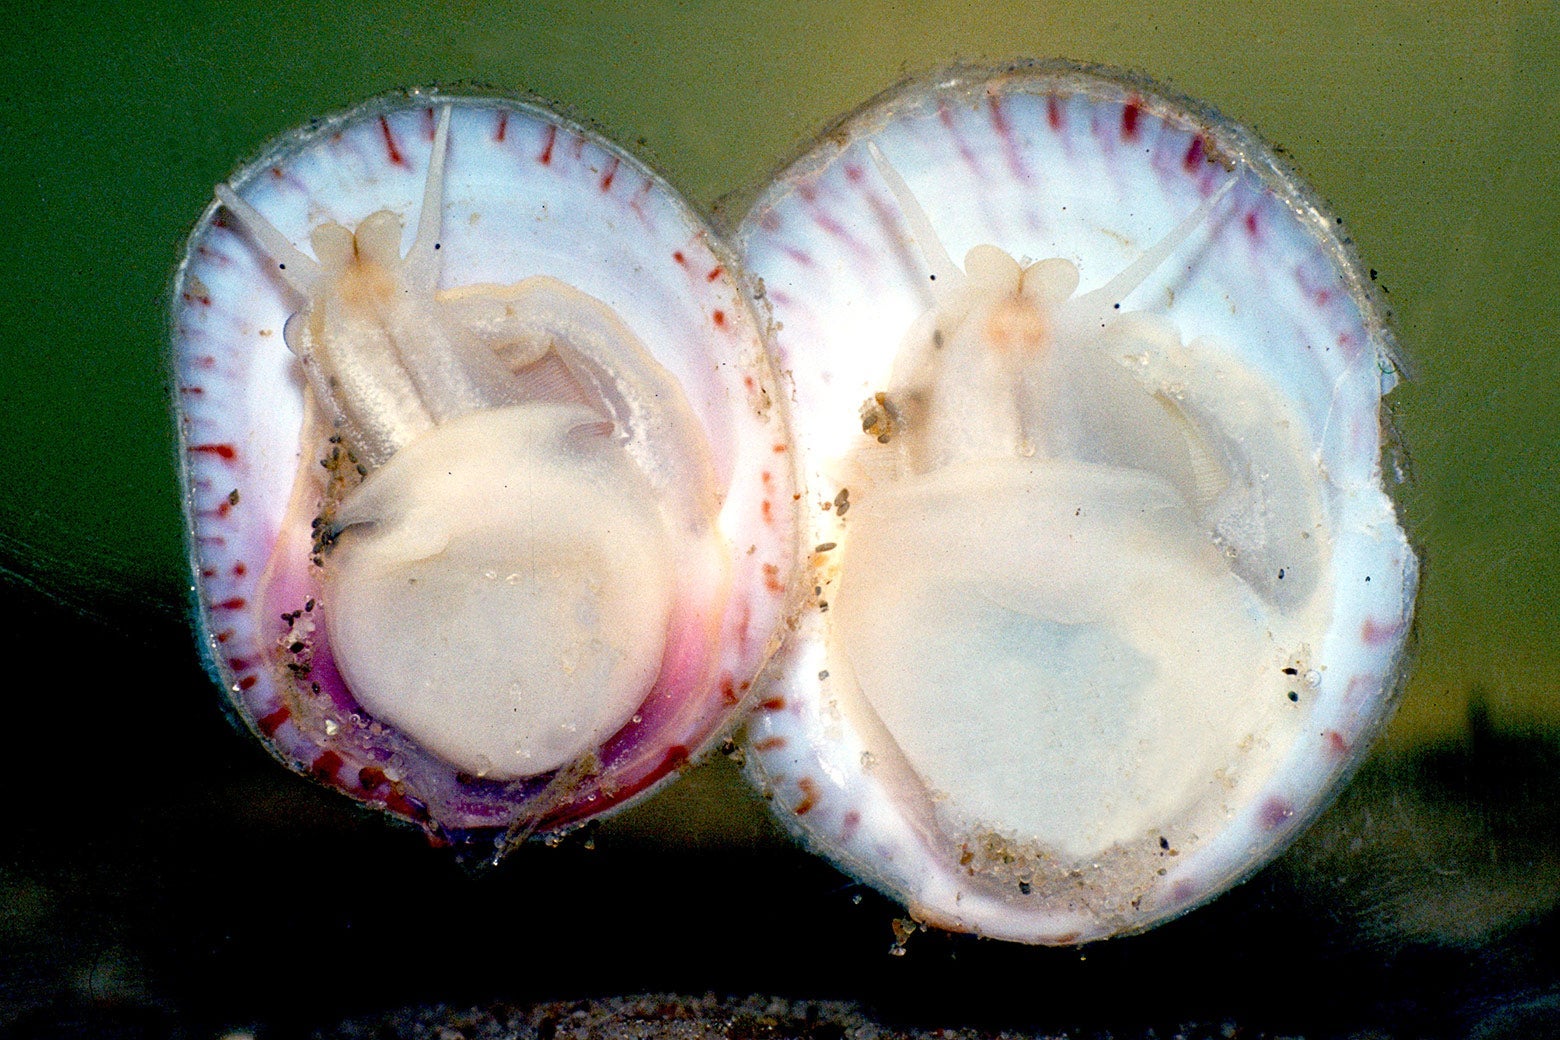 Two colorful shells with a fleshy snail meat inside.